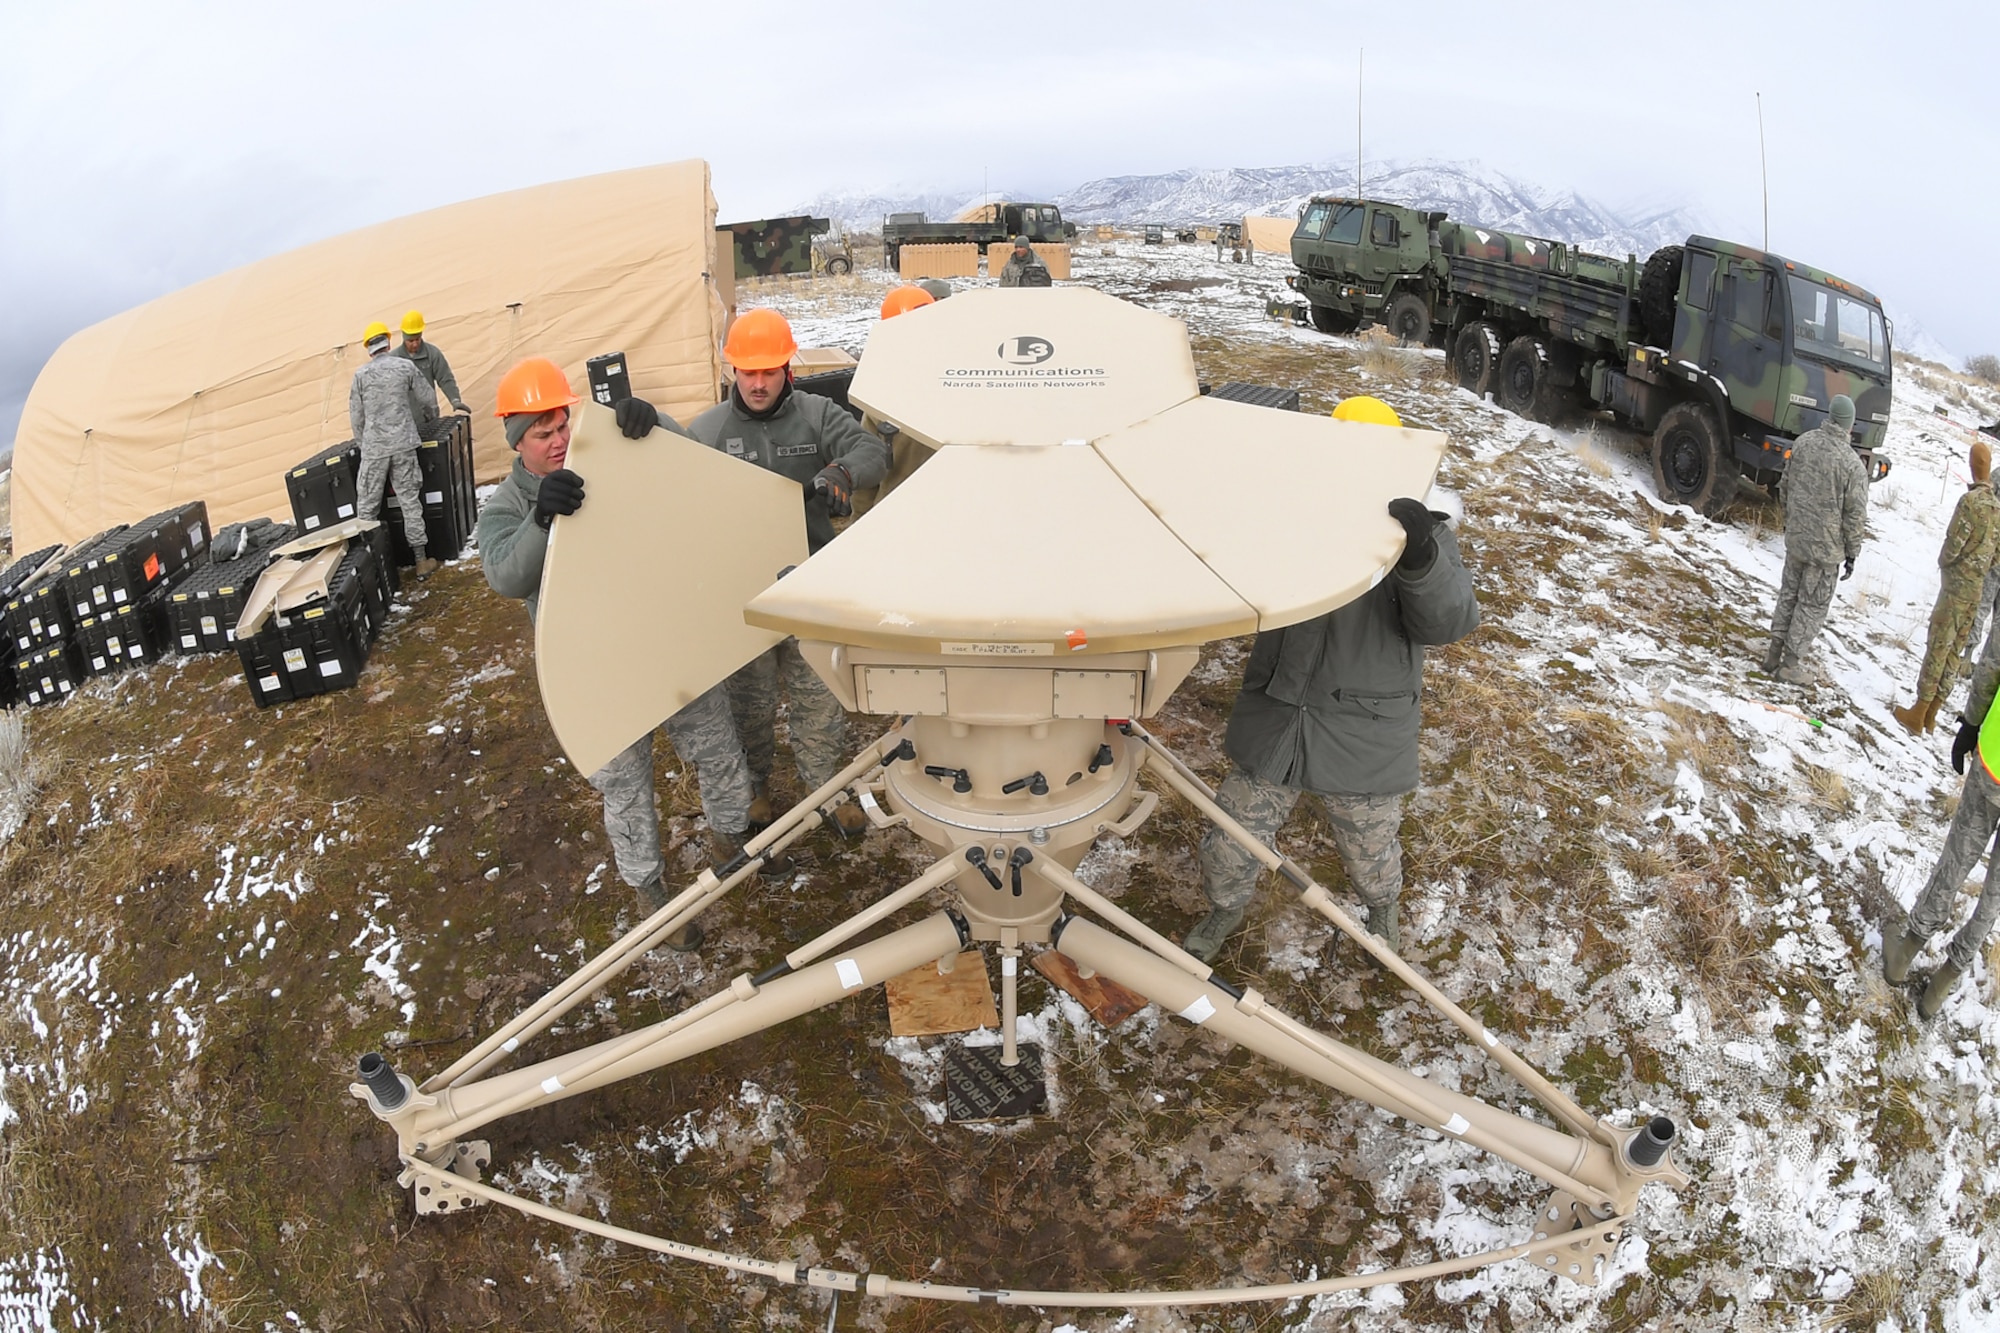 Airmen with the 729th Air Control Squadron set up a communications antenna Feb. 5, 2019, during a readiness exercise at Hill Air Force Base, Utah. The evolution was part of an exercise to mobilize and set up a deployed radar location and control reporting center. (U.S. Air Force photo by Todd Cromar)